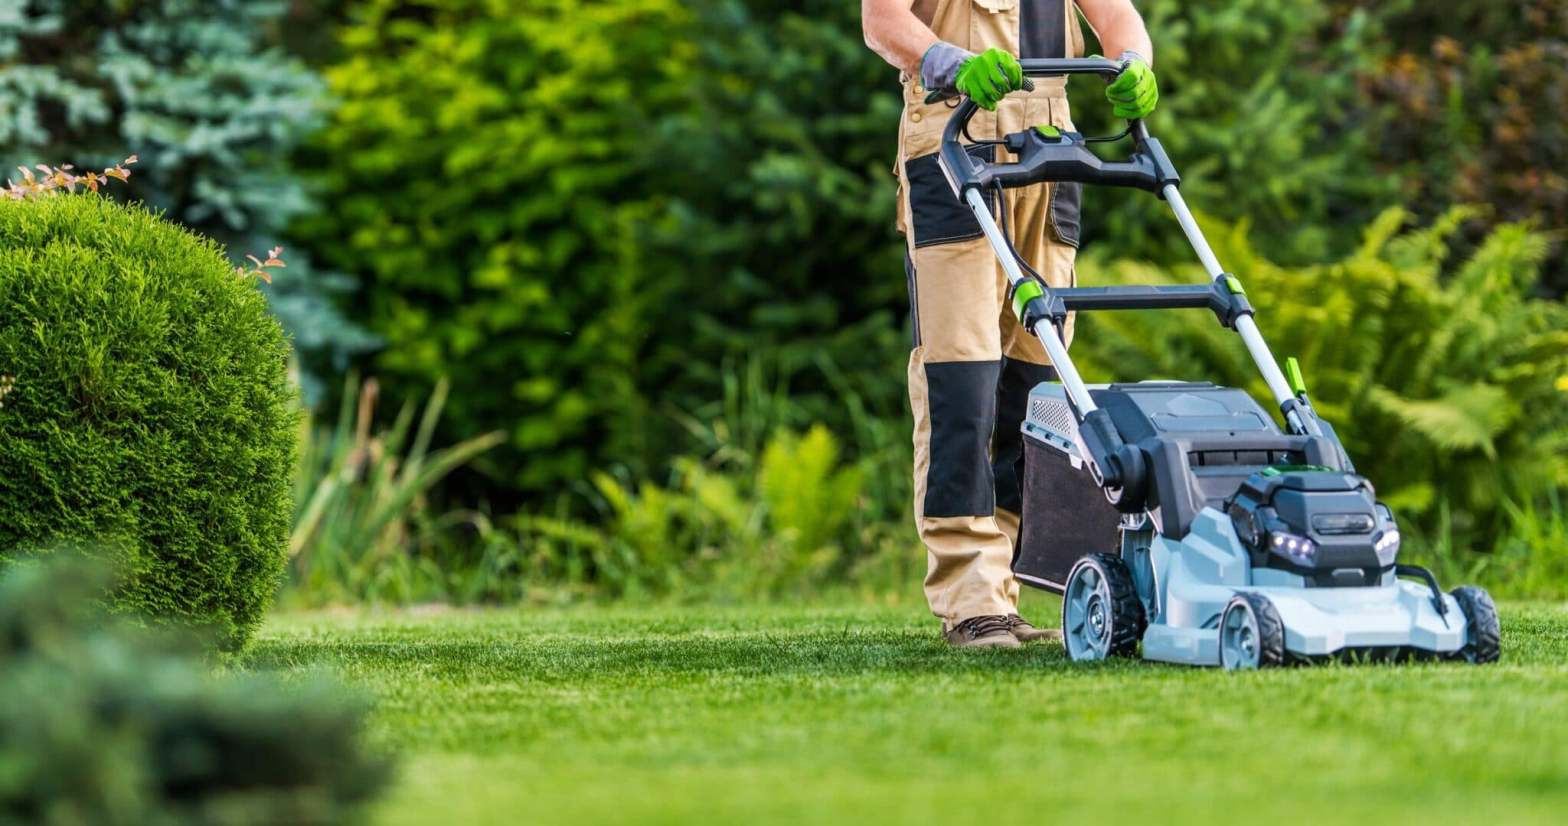 5 Reasons Why You Should Get an Electric Lawn Mower